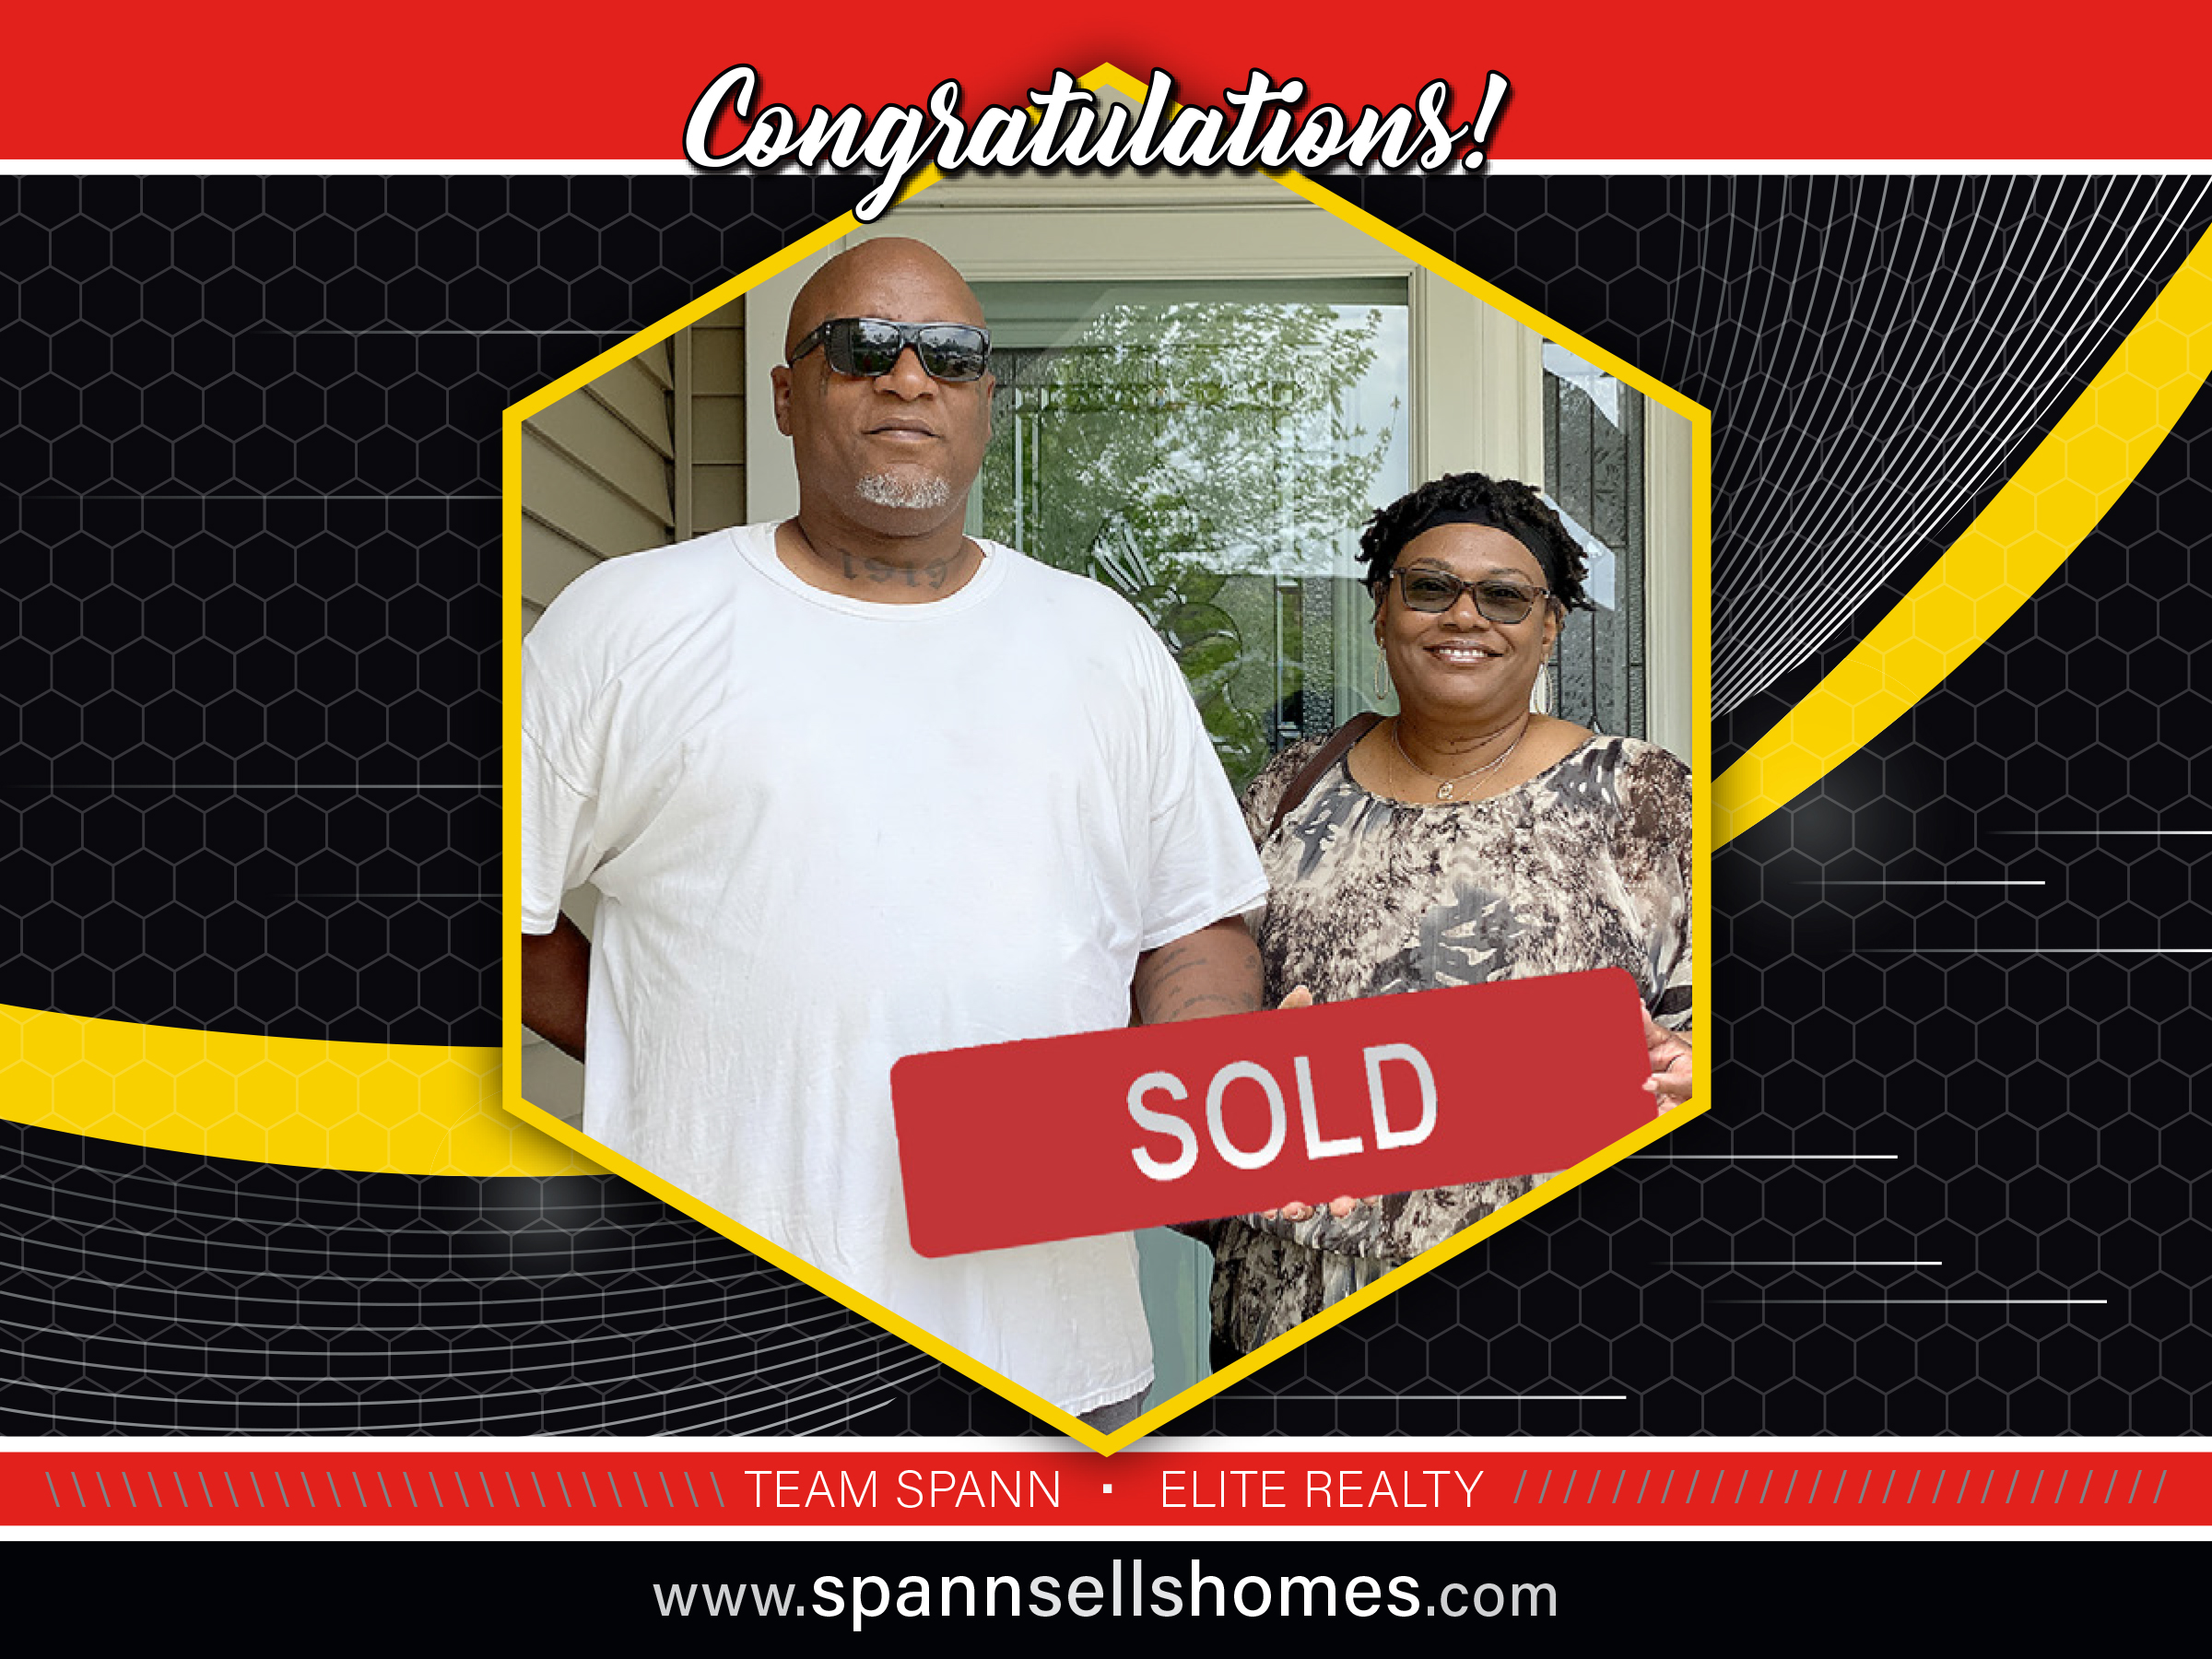 Buyers Steve and Mignon are so happy